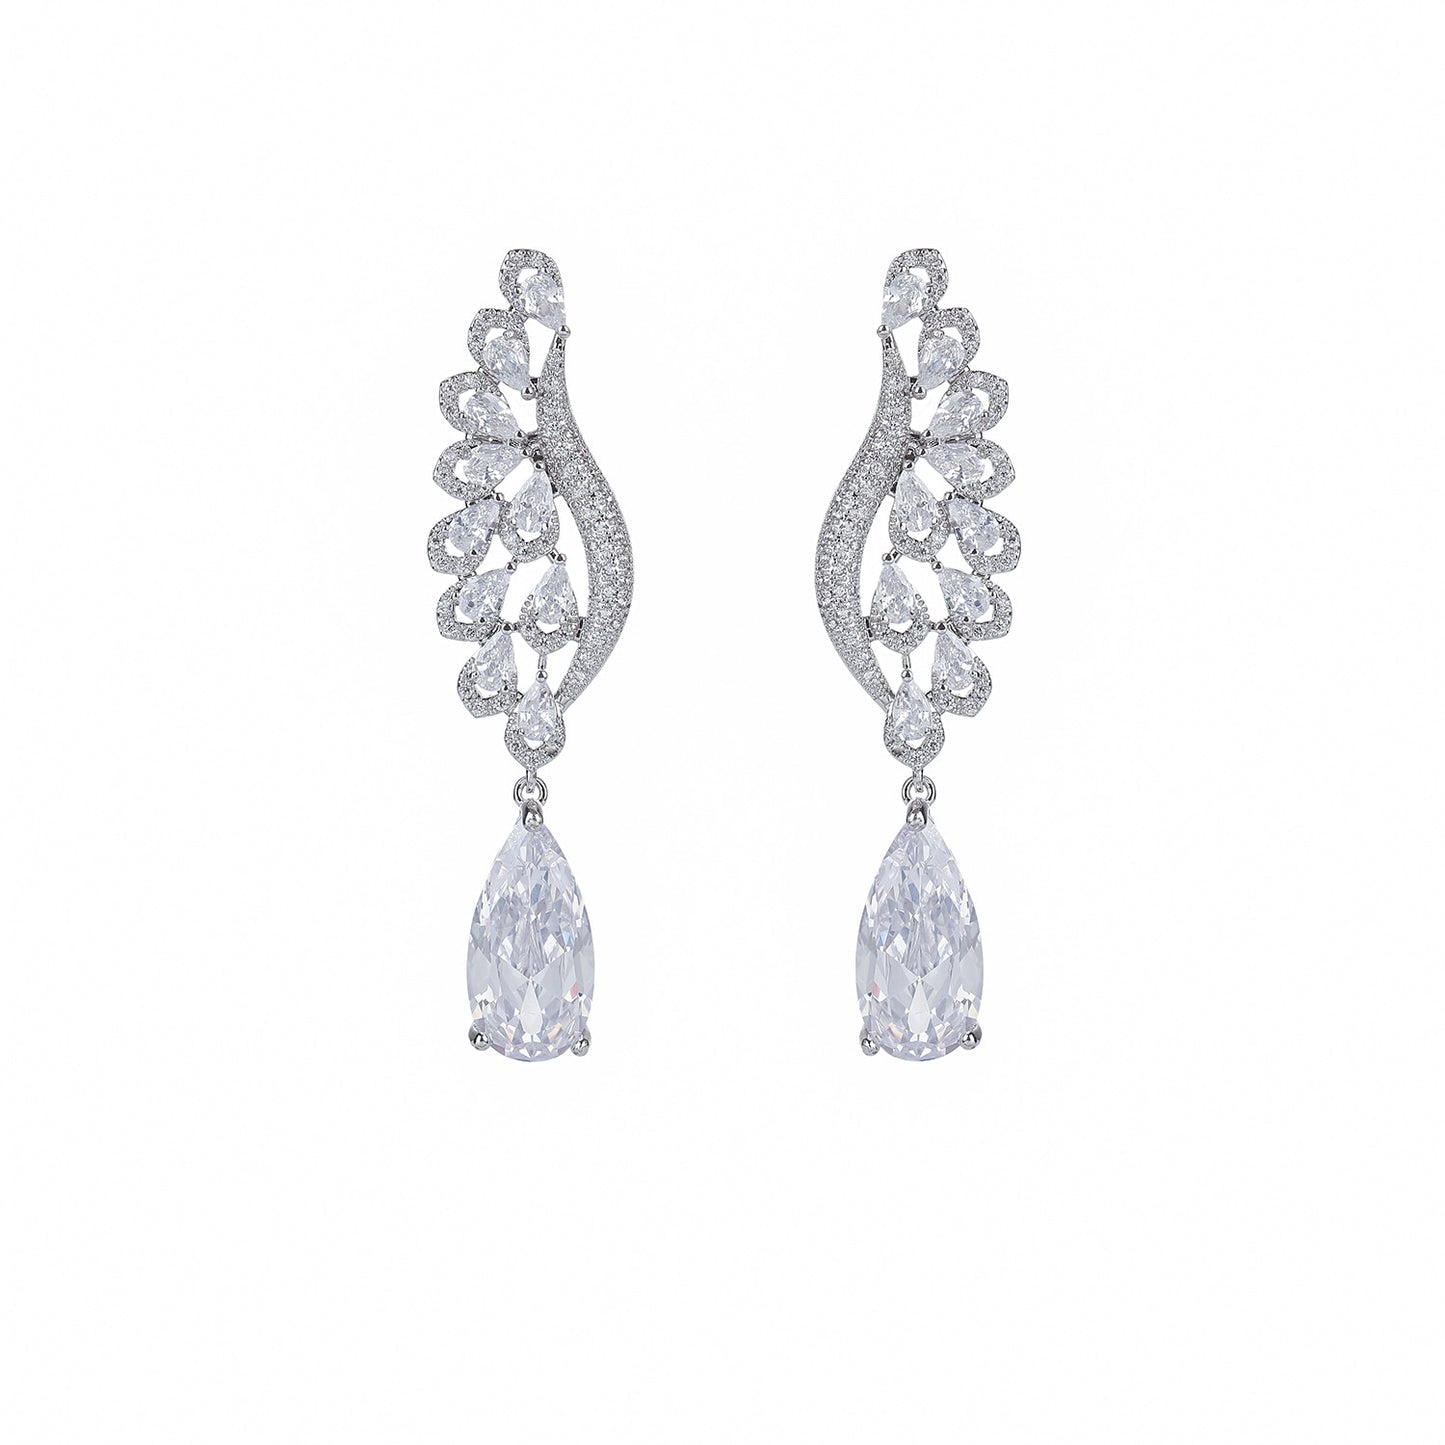 Cubic Zircon Crystal Angel Wing Earrings for Weddings Special Formal Events